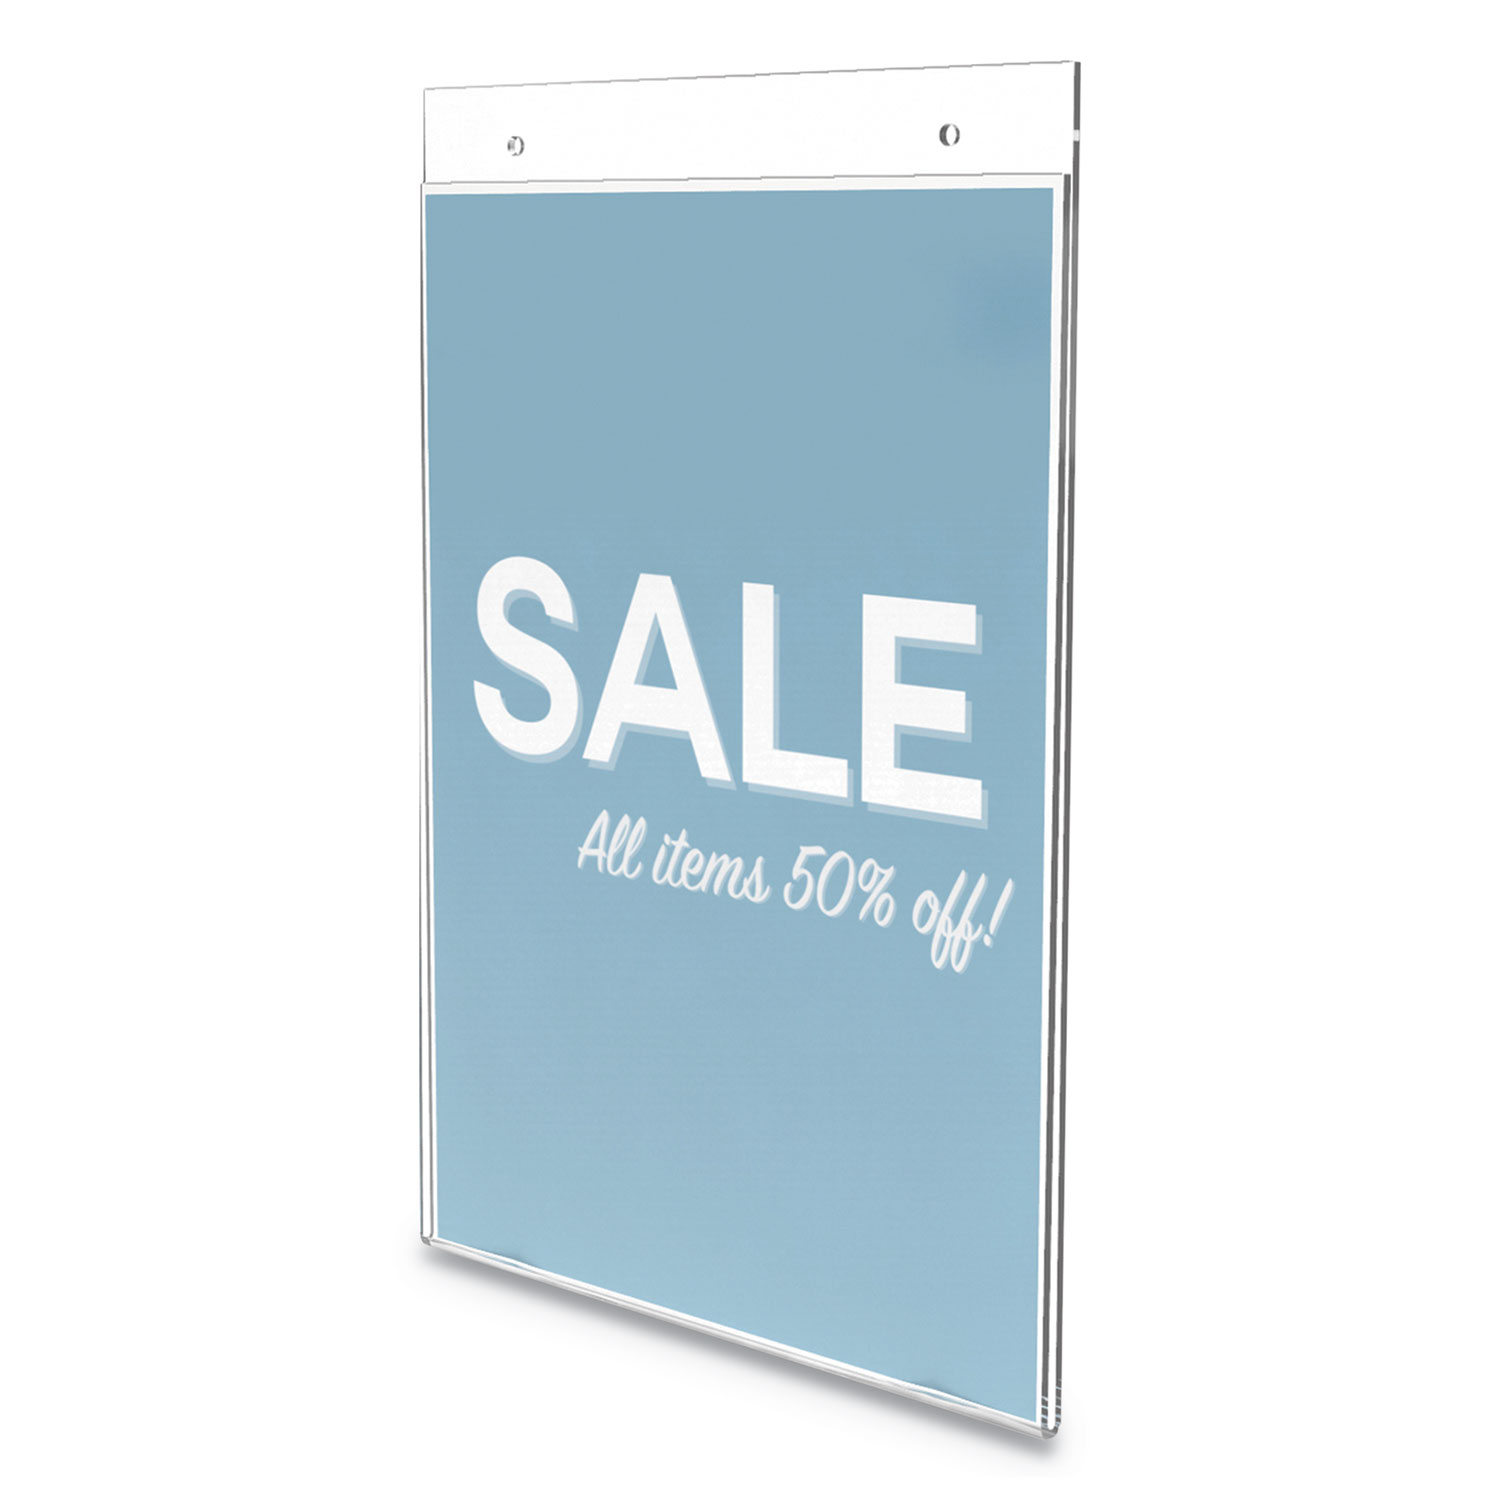  deflecto 68201-VP Classic Image Wall Sign Holder, 8 1/2 x 11, Clear Frame, 12/Pack (DEF68201VP) 